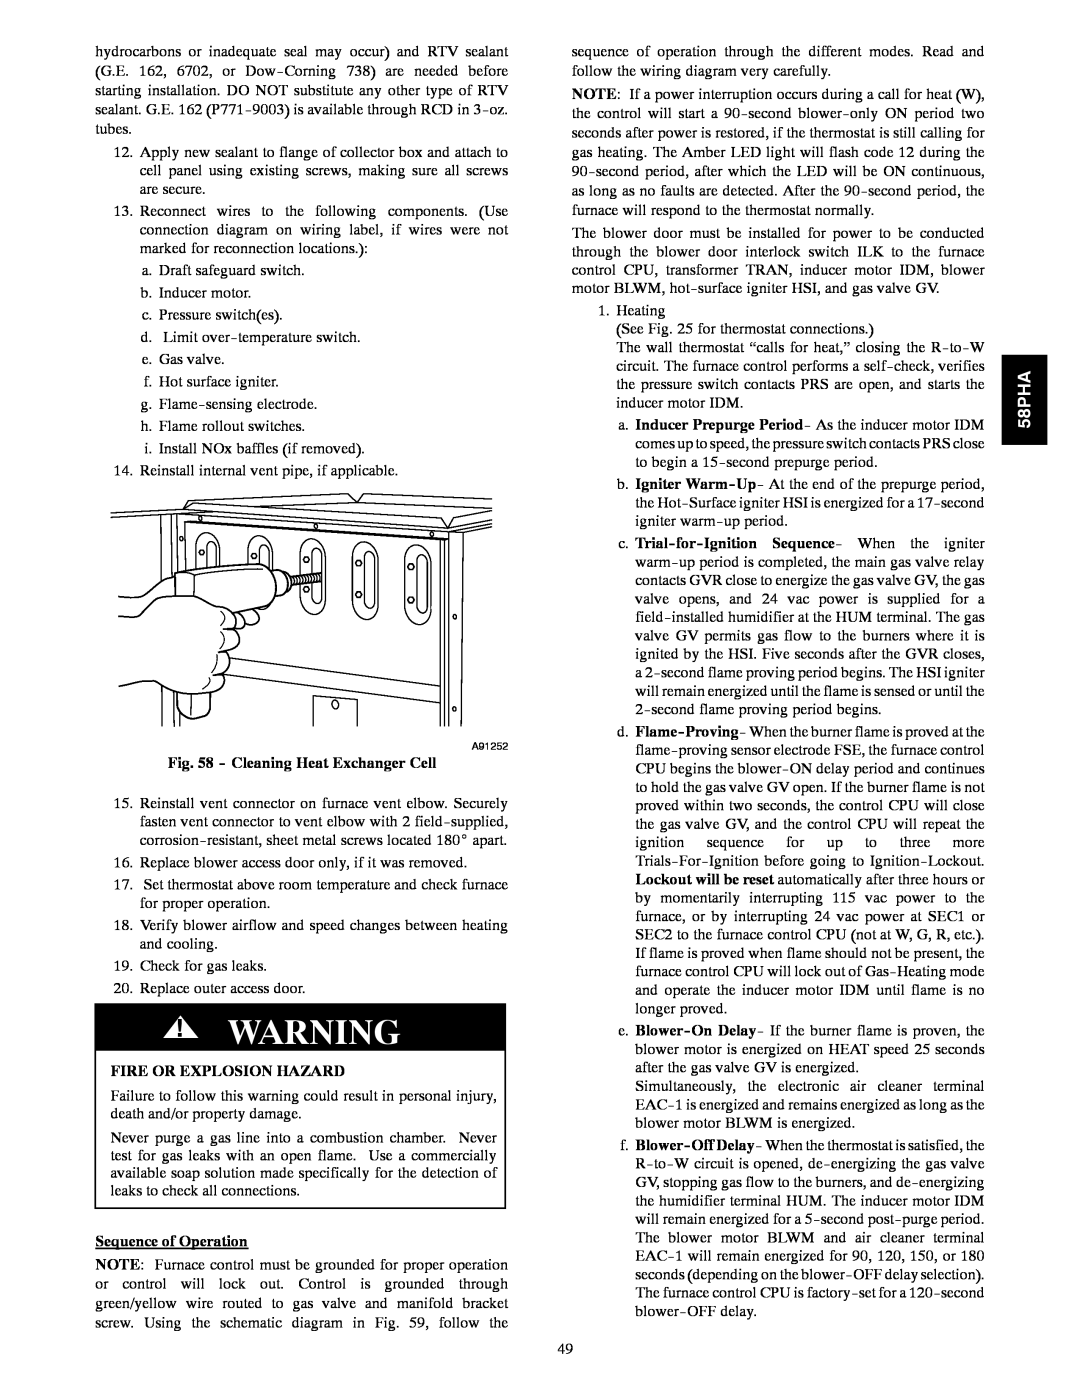 Carrier 58PHA/PHX instruction manual Cleaning Heat Exchanger Cell, Fire Or Explosion Hazard, Sequence of Operation 